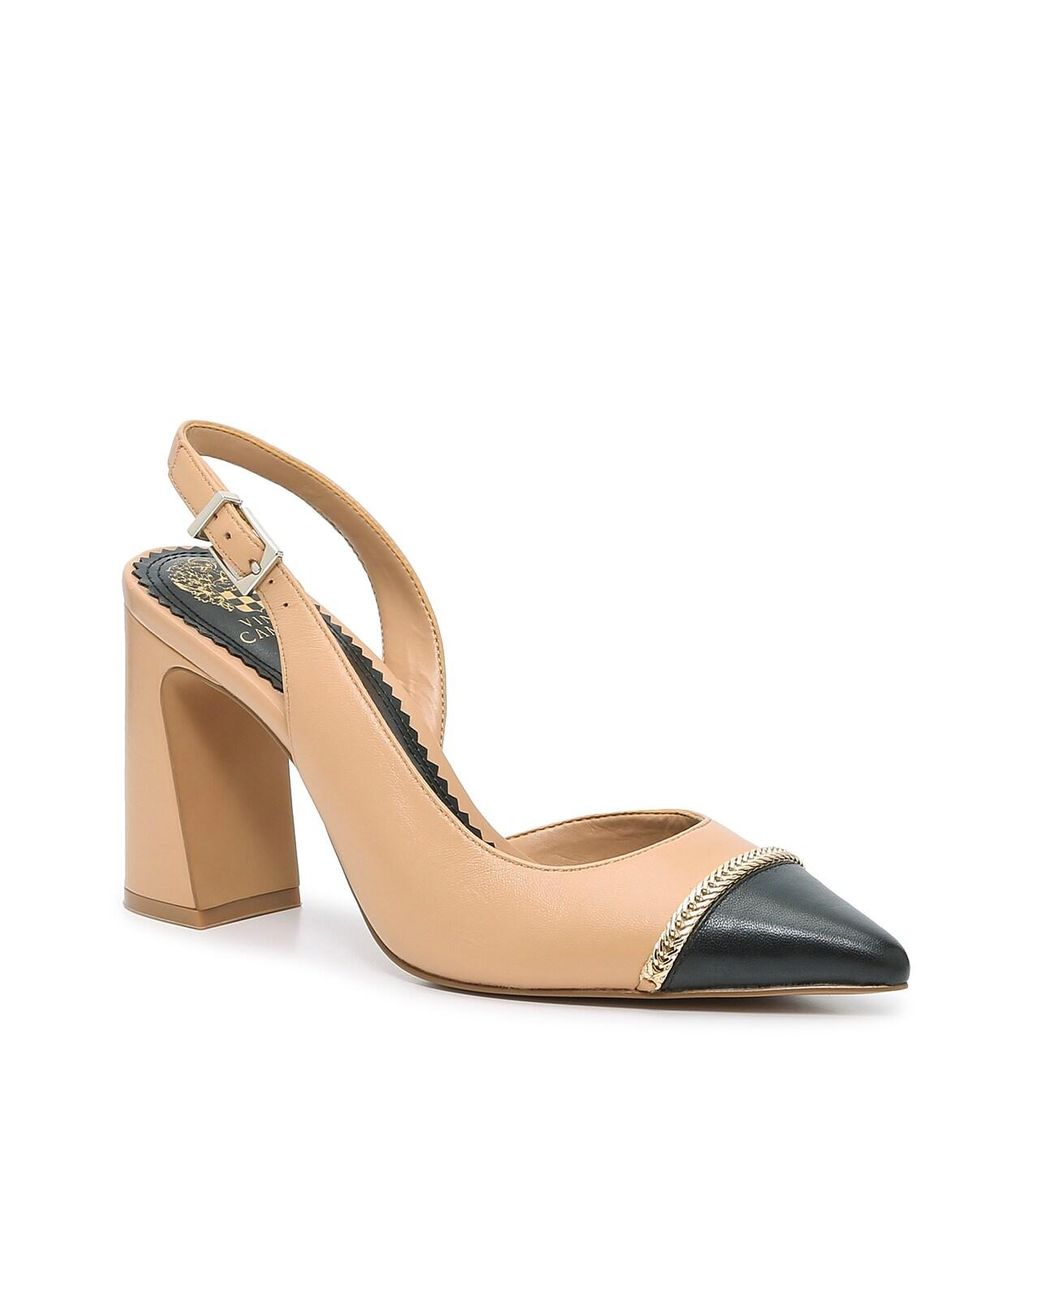 Vince Camuto Antelle Slingback Pump in Black | Lyst